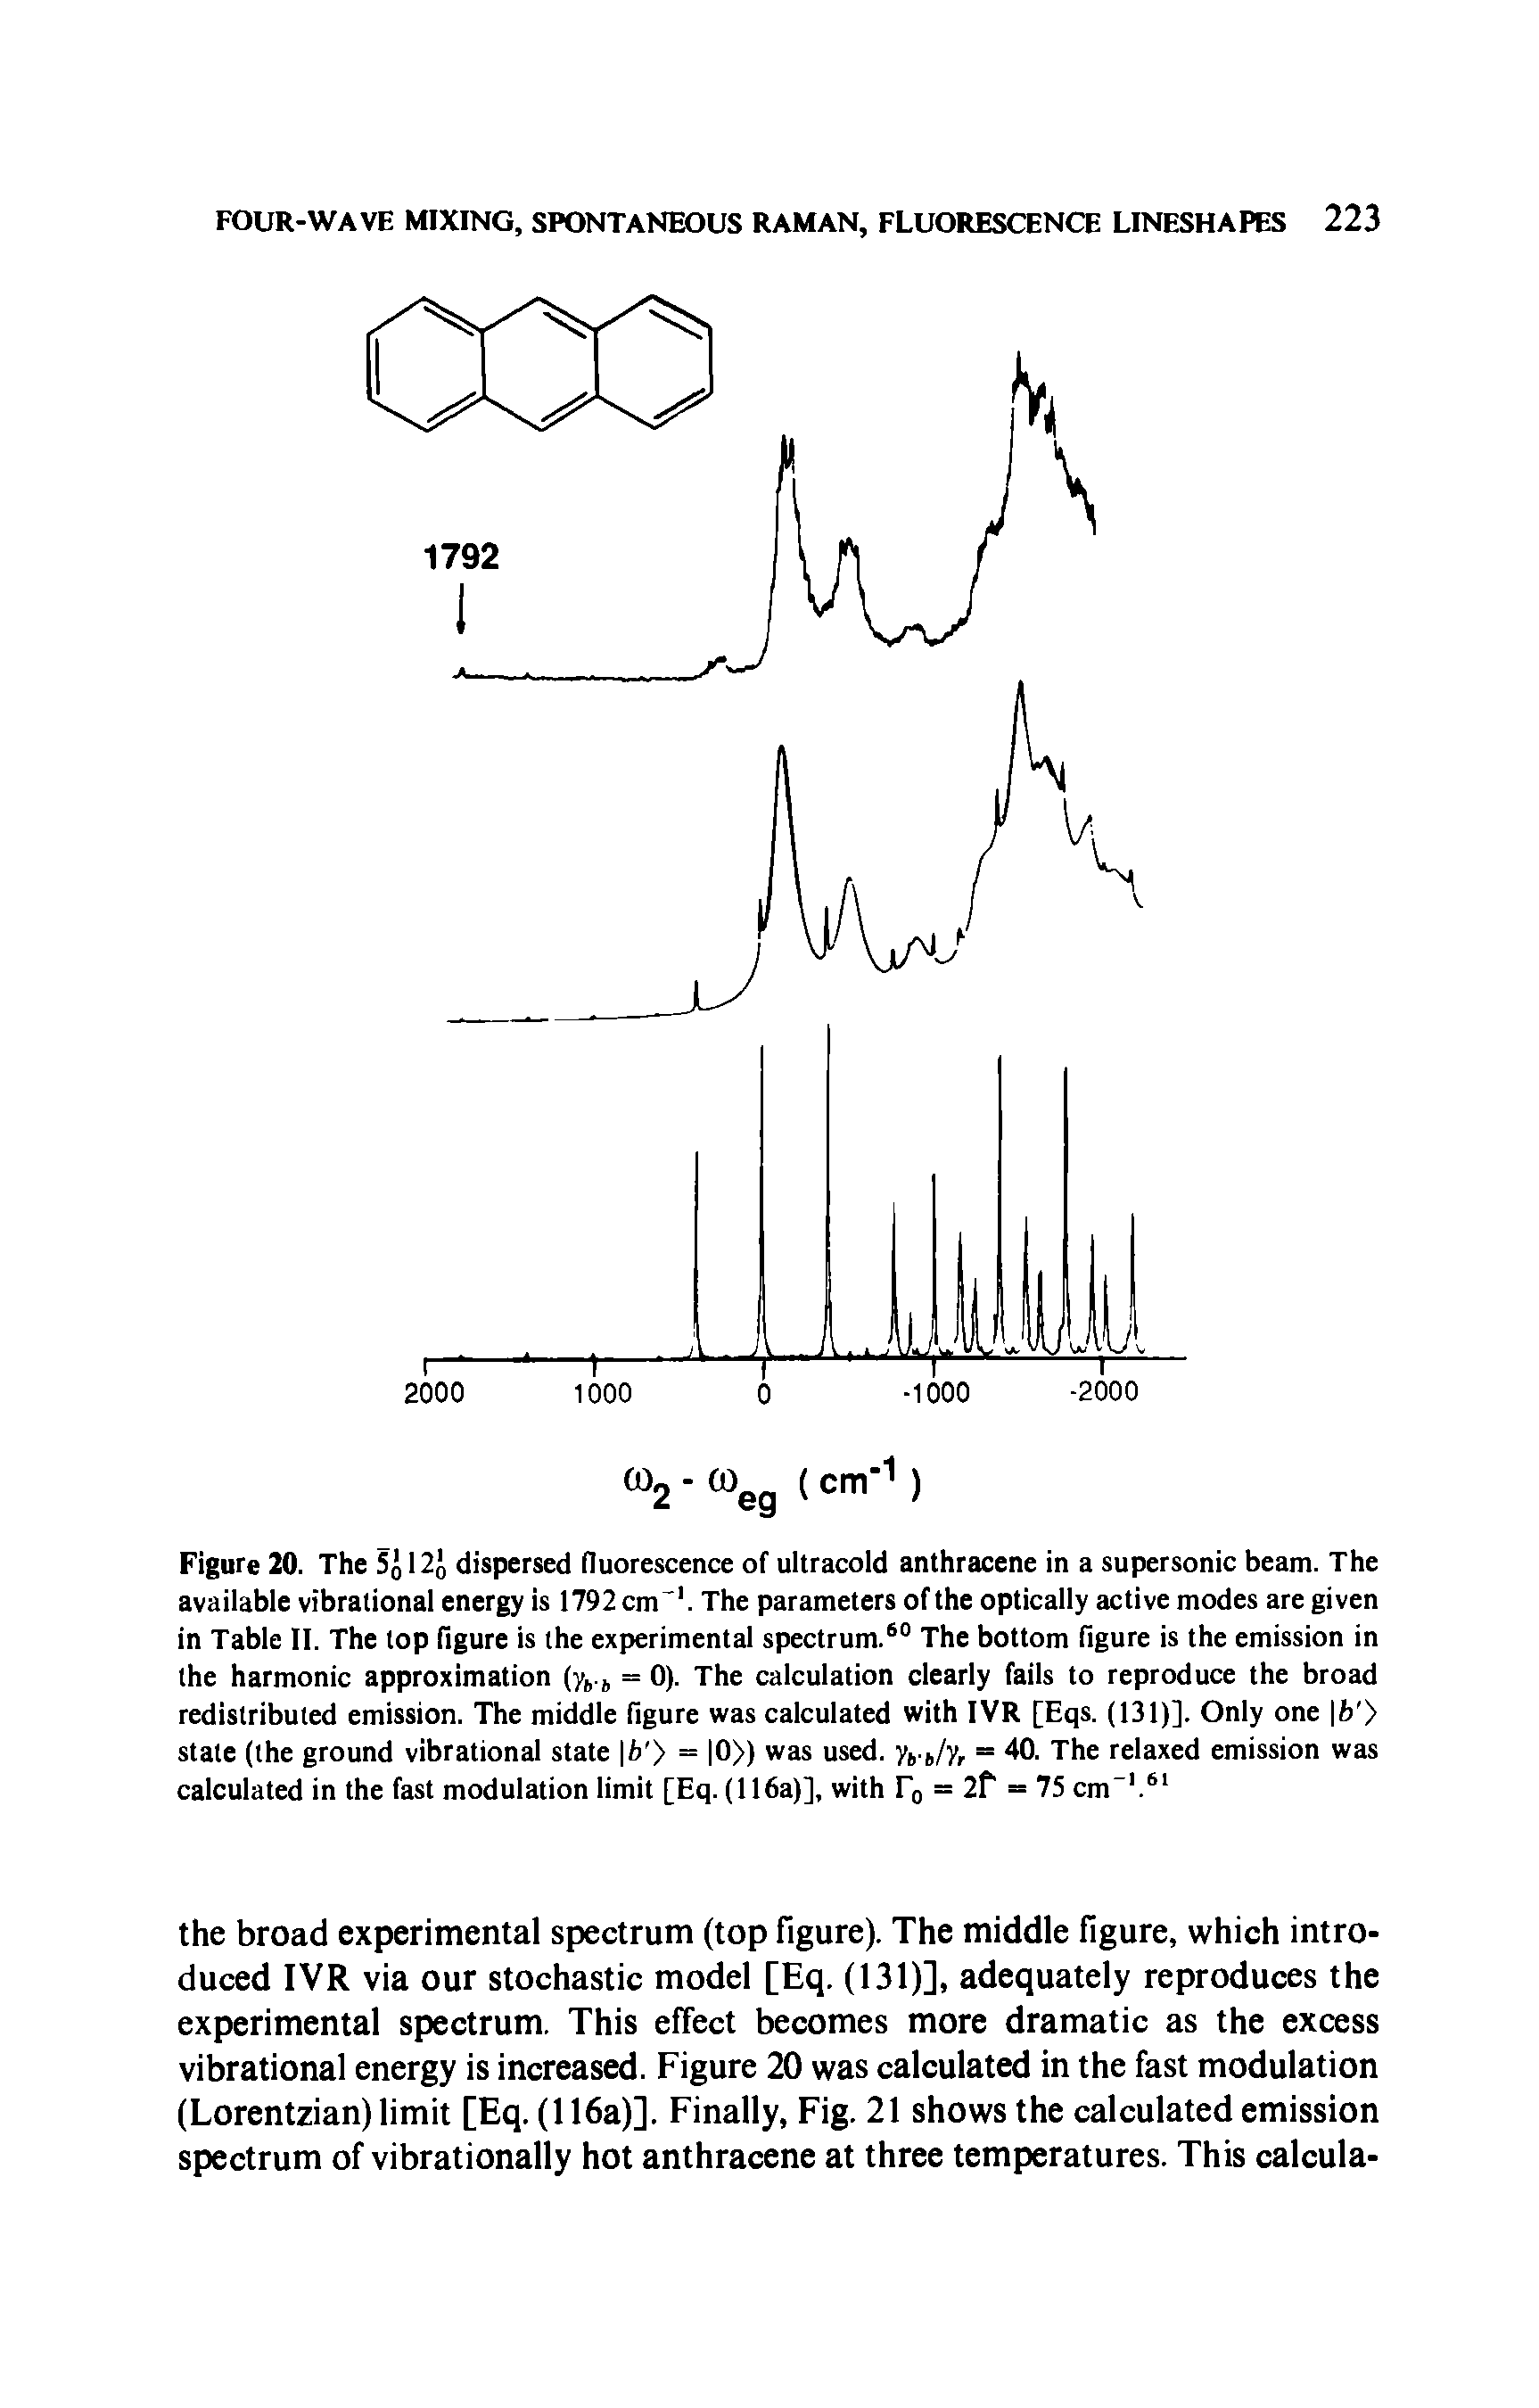 Figure 20. The 5j 12j dispersed fluorescence of ultracold anthracene in a supersonic beam. The available vibrational energy is 1792 cm1. The parameters of the optically active modes are given in Table II. The top figure is the experimental spectrum.60 The bottom figure is the emission in the harmonic approximation (y6.6 = 0). The calculation clearly fails to reproduce the broad redistributed emission. The middle figure was calculated with IVR [Eqs. (131)]. Only one b ) state (the ground vibrational state f/> = 0 was used. yt.t/y, = 40. The relaxed emission was calculated in the fast modulation limit [Eq. (116a)], with f0 = 2f = 75 cm-1.61...